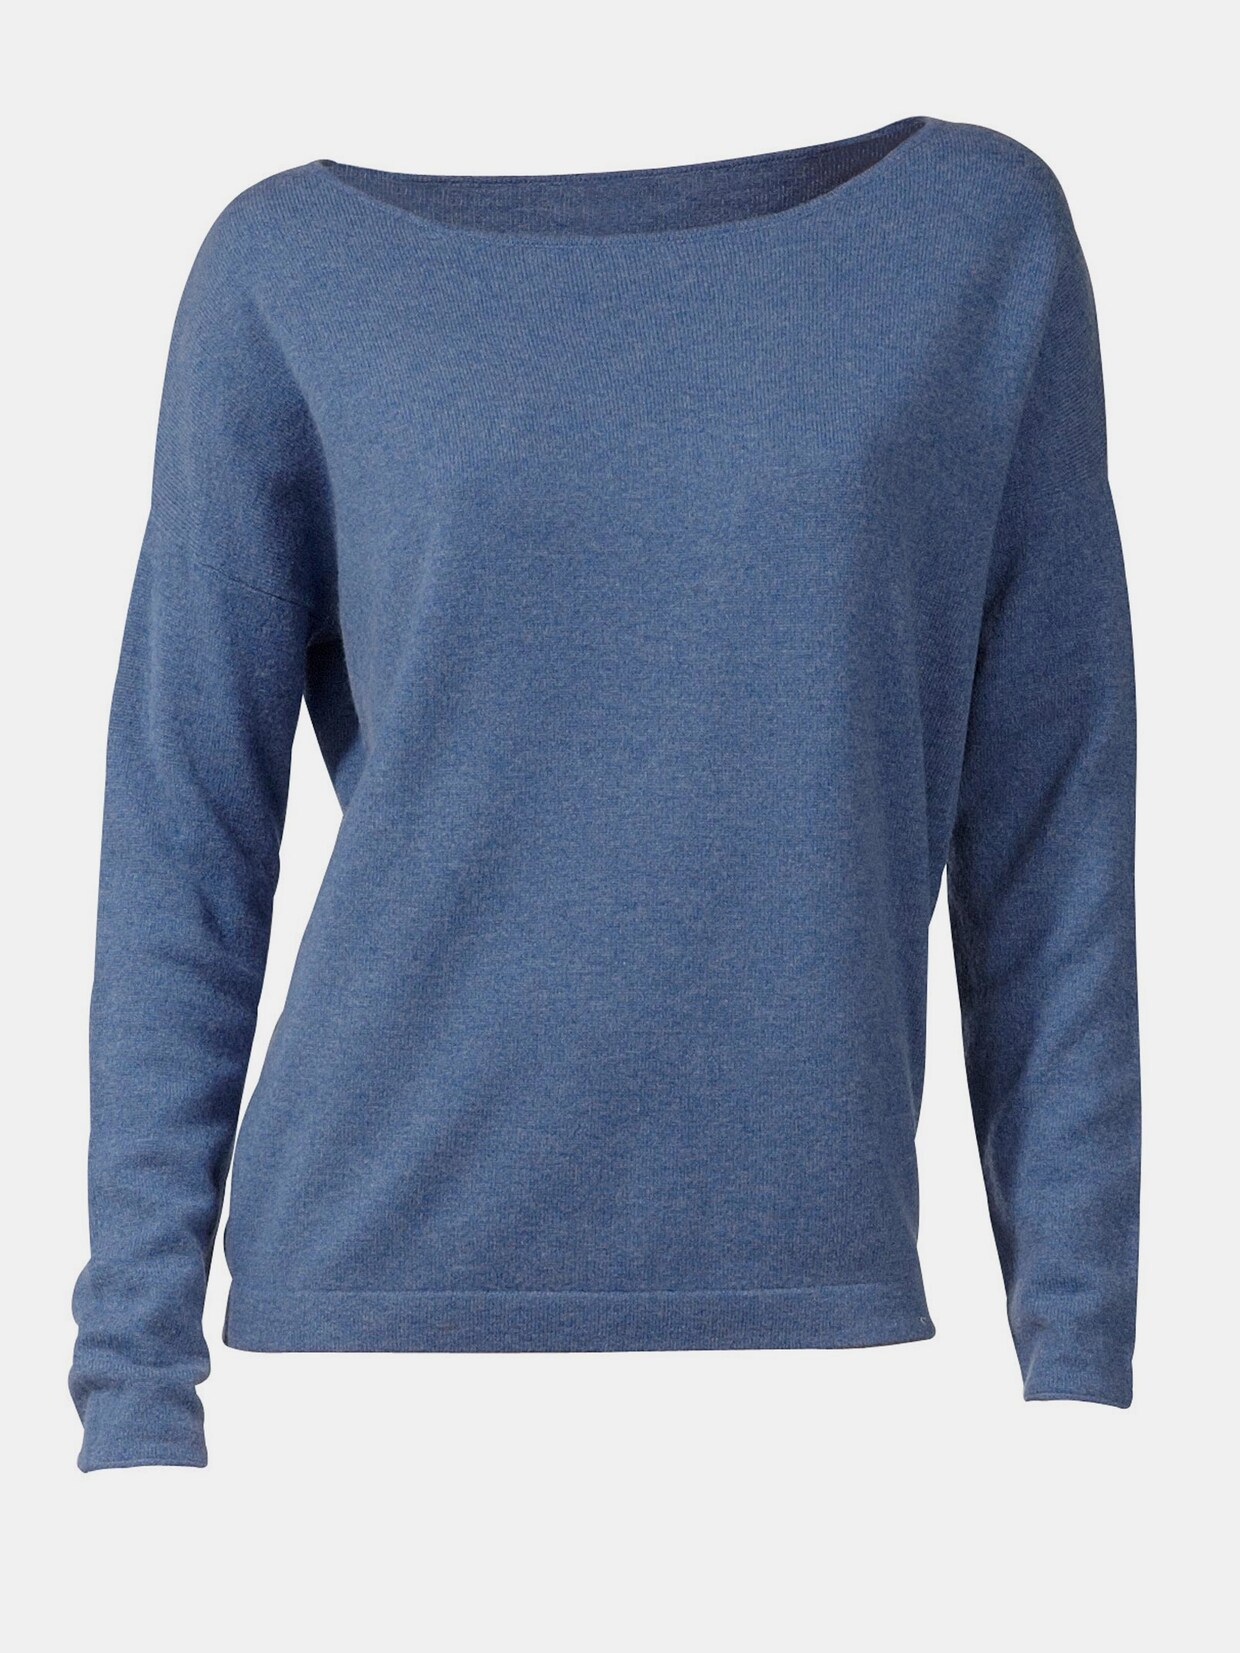 Best Connections Oversized Pullover - blau